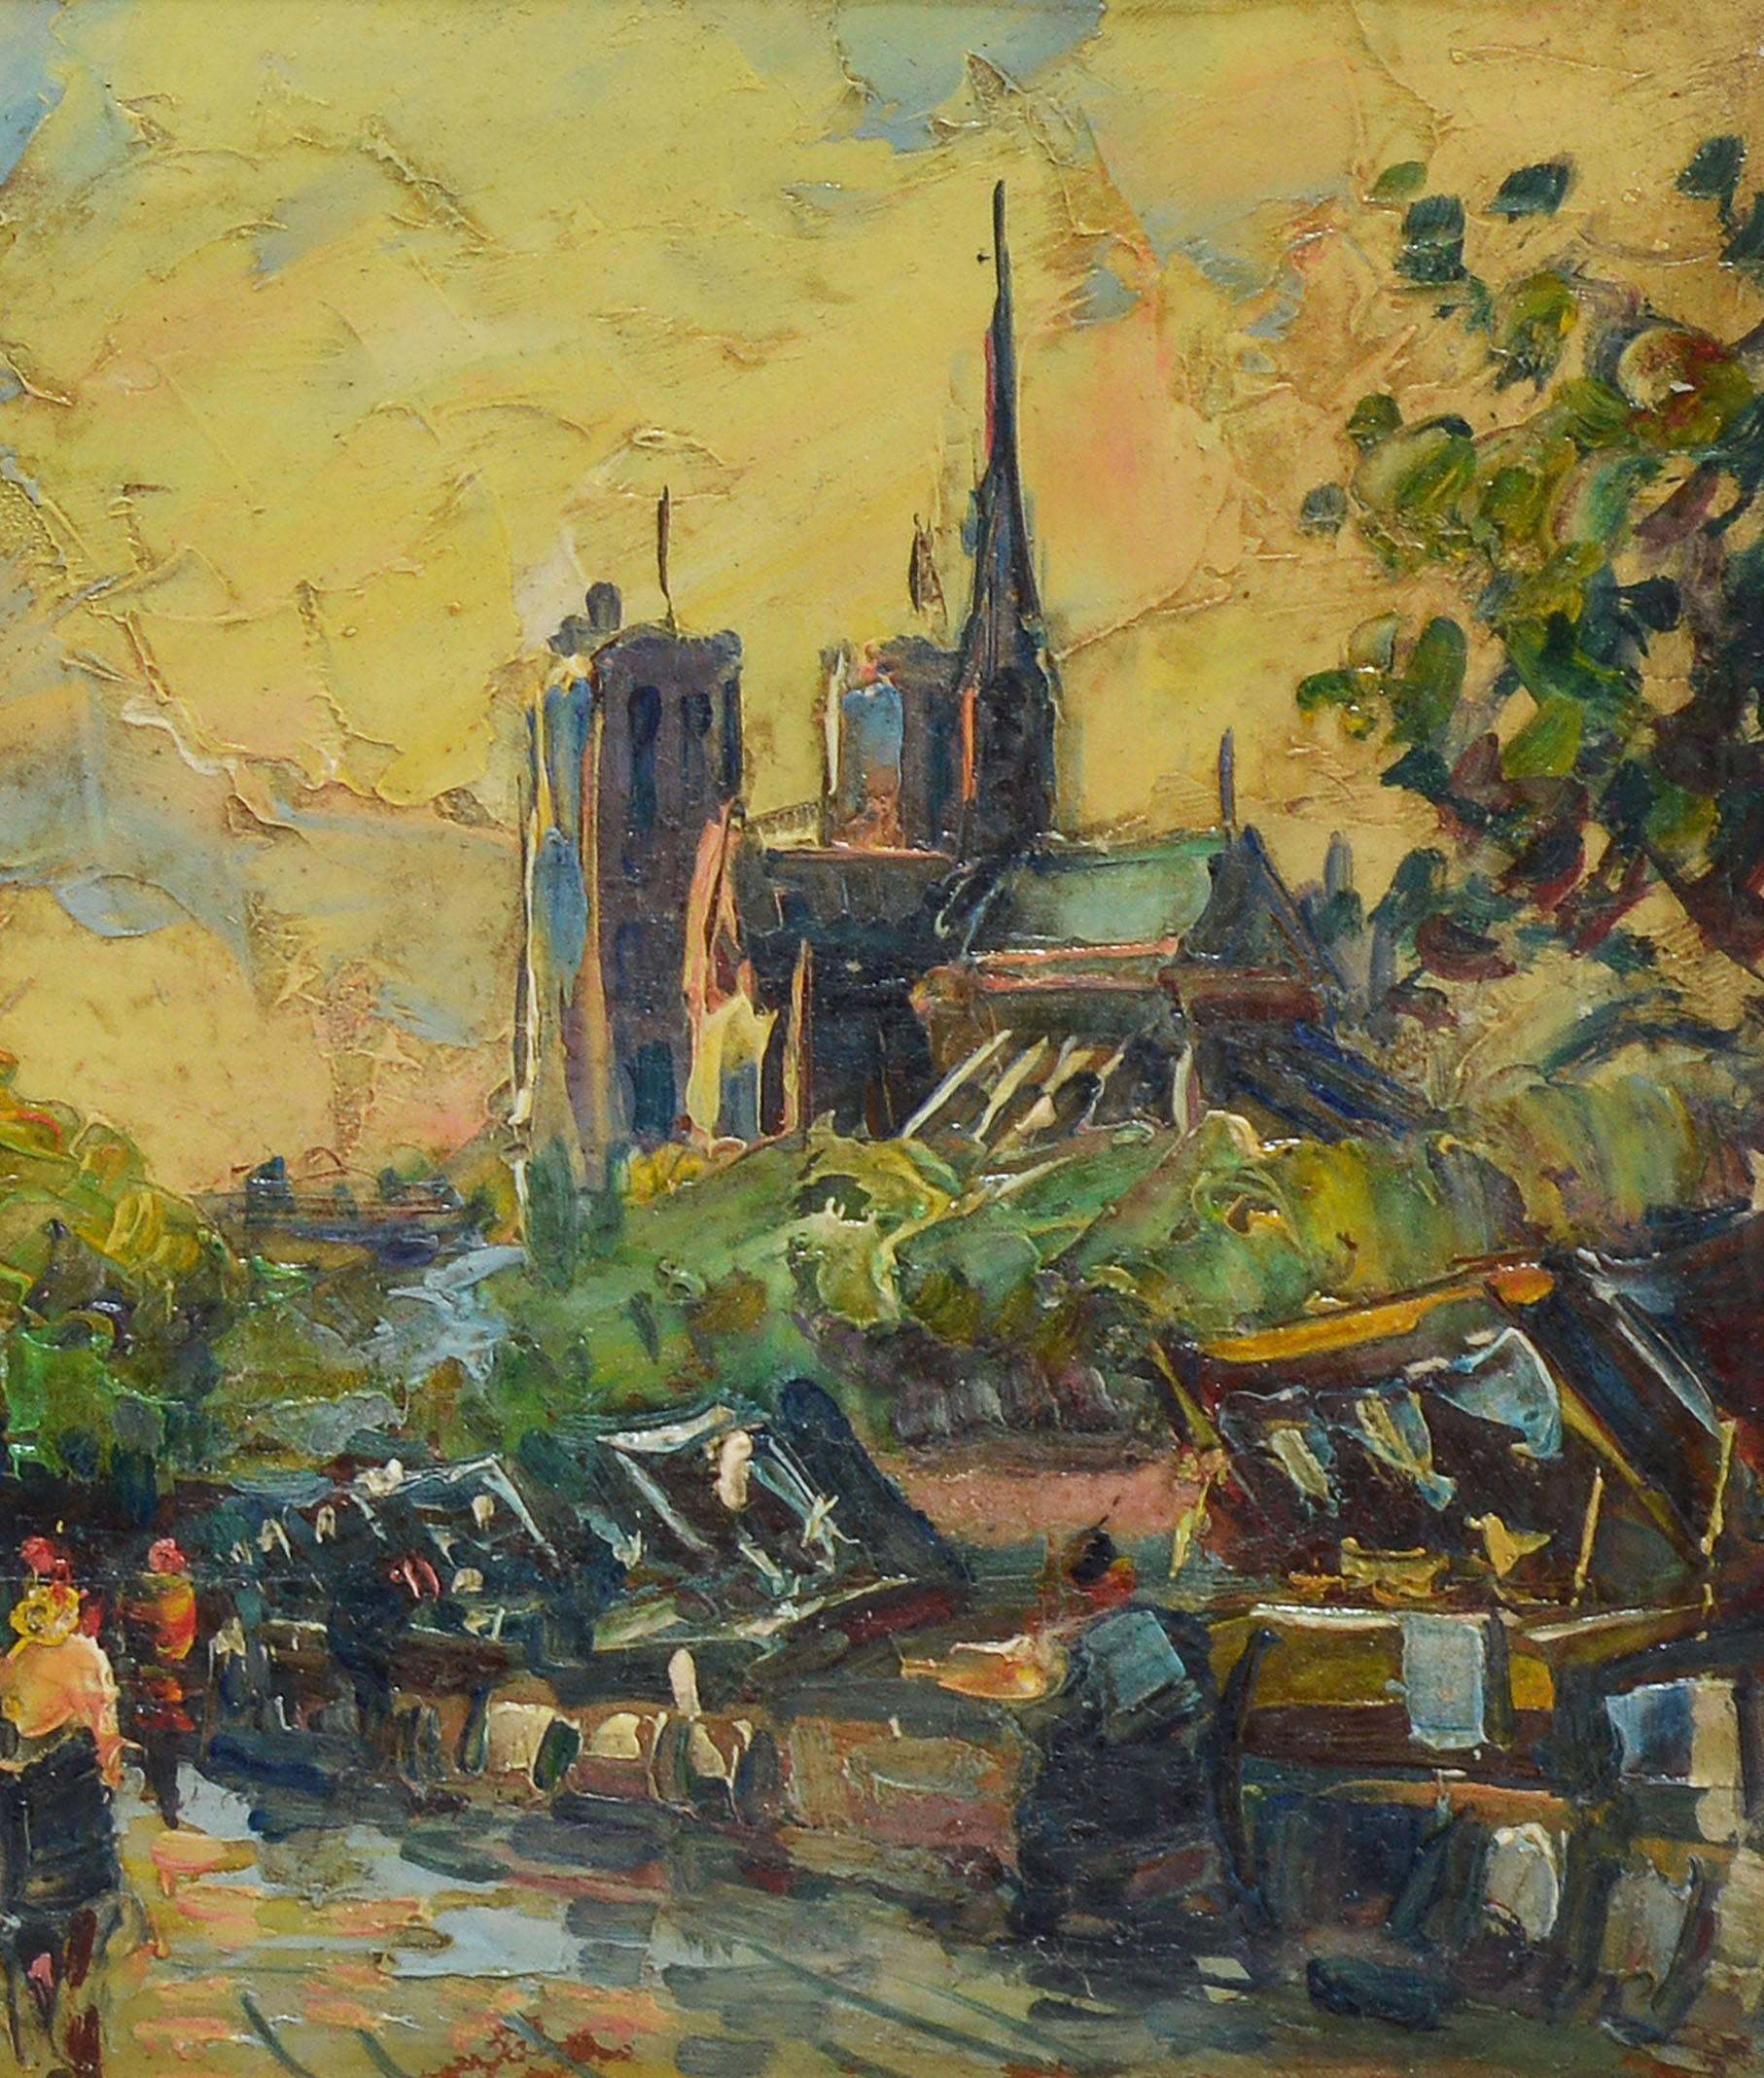 Impressionist oil painting of Paris.  Oil on board, circa 1940.  Unsigned.  Displayed in a giltwood frame with a linen liner.  Image size, 9"L x 6"H, overall 14"L x 11"H.